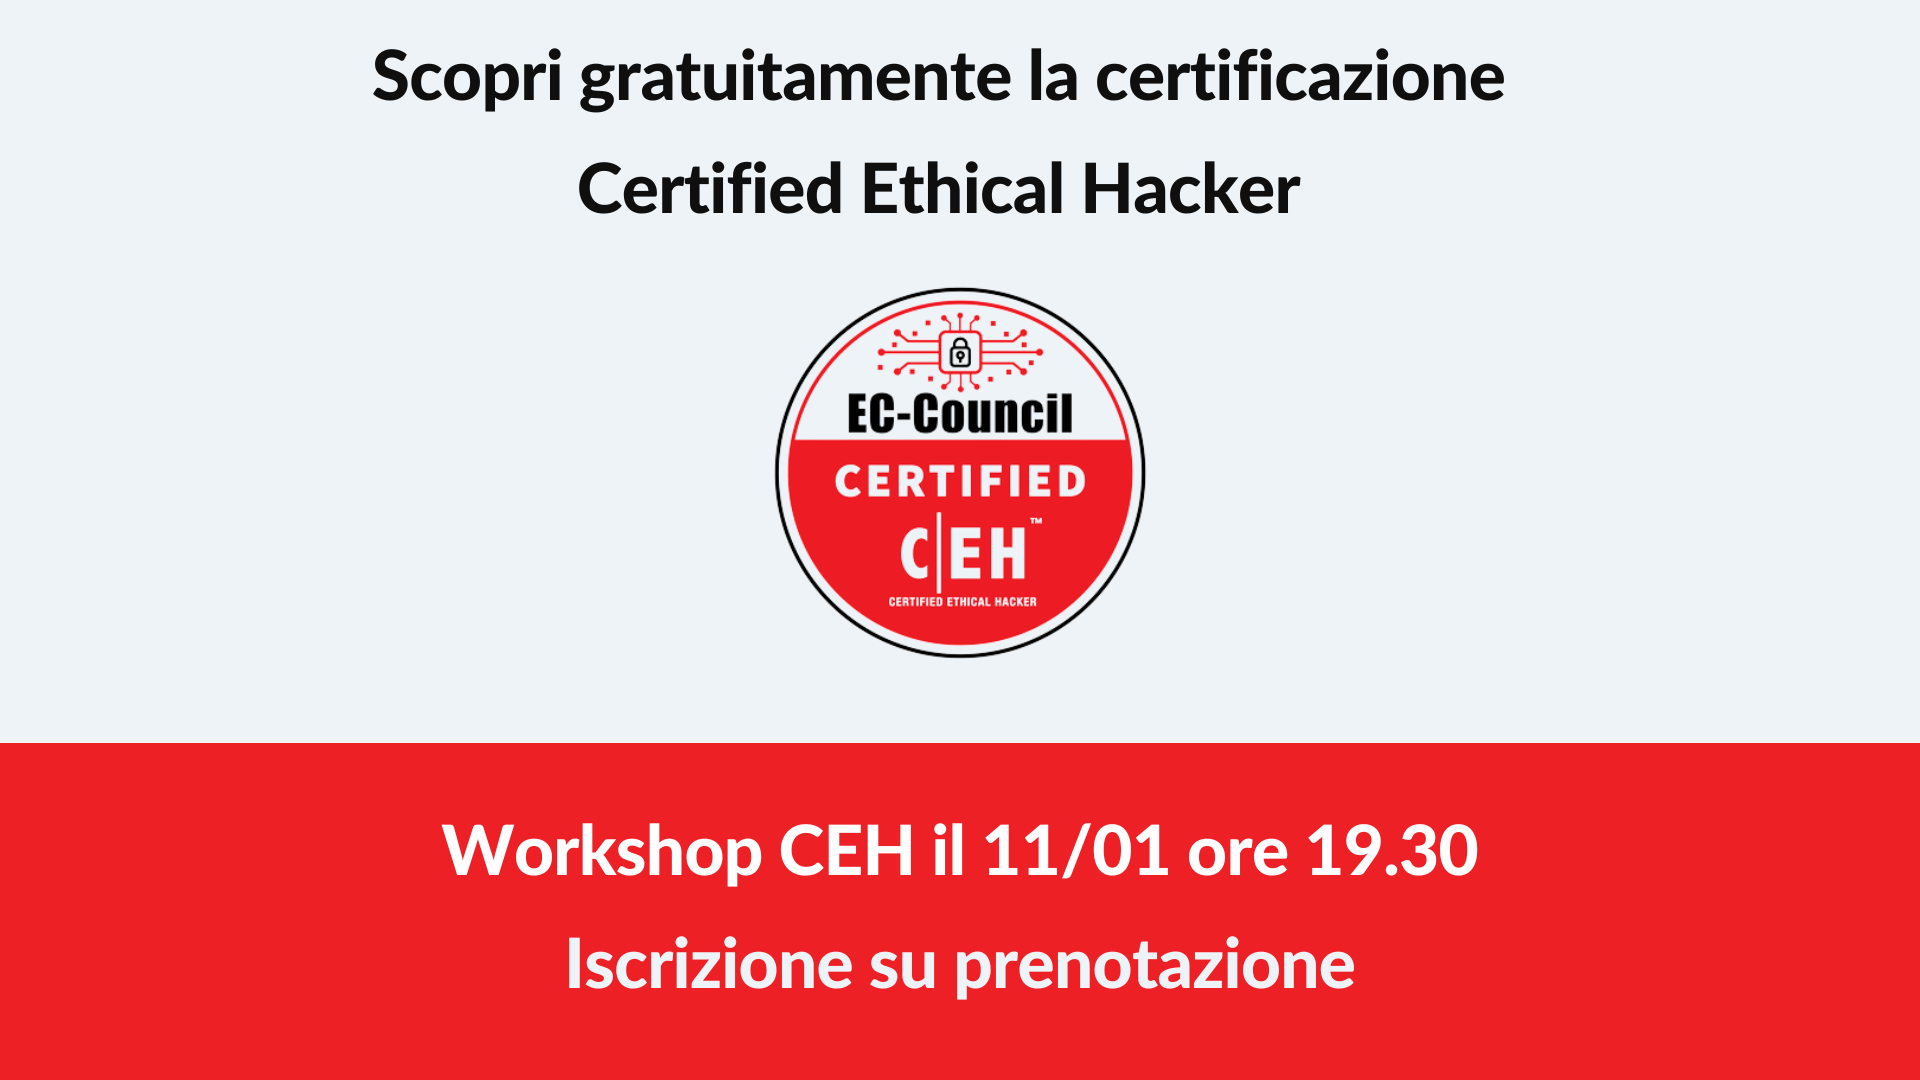 Workshop CEH - Certified Ethical Hacker Gratuito